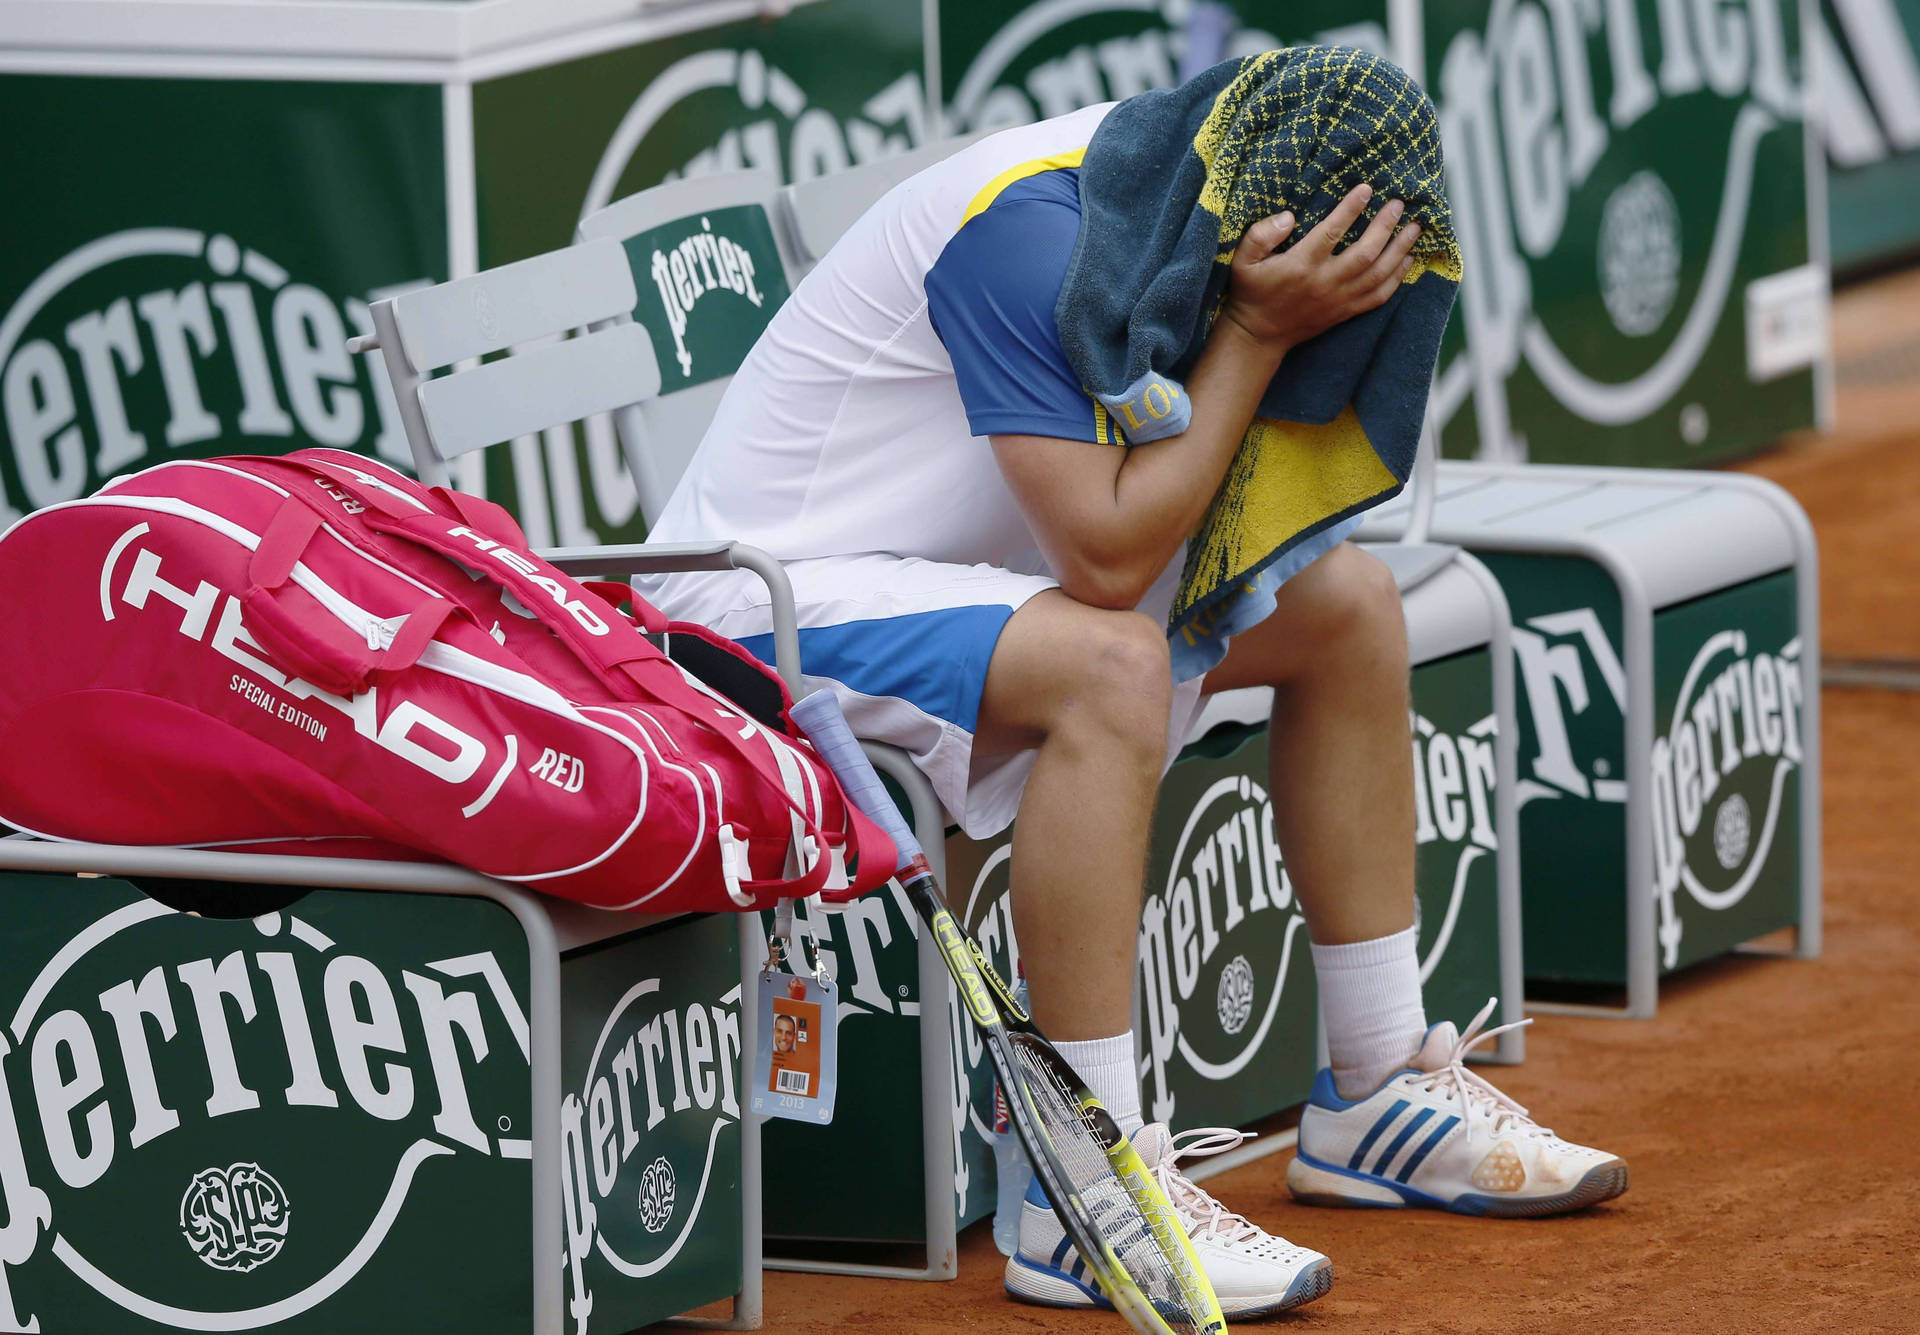 Exhausted Mikhail Youzhny in a Post-Match Moment Wallpaper